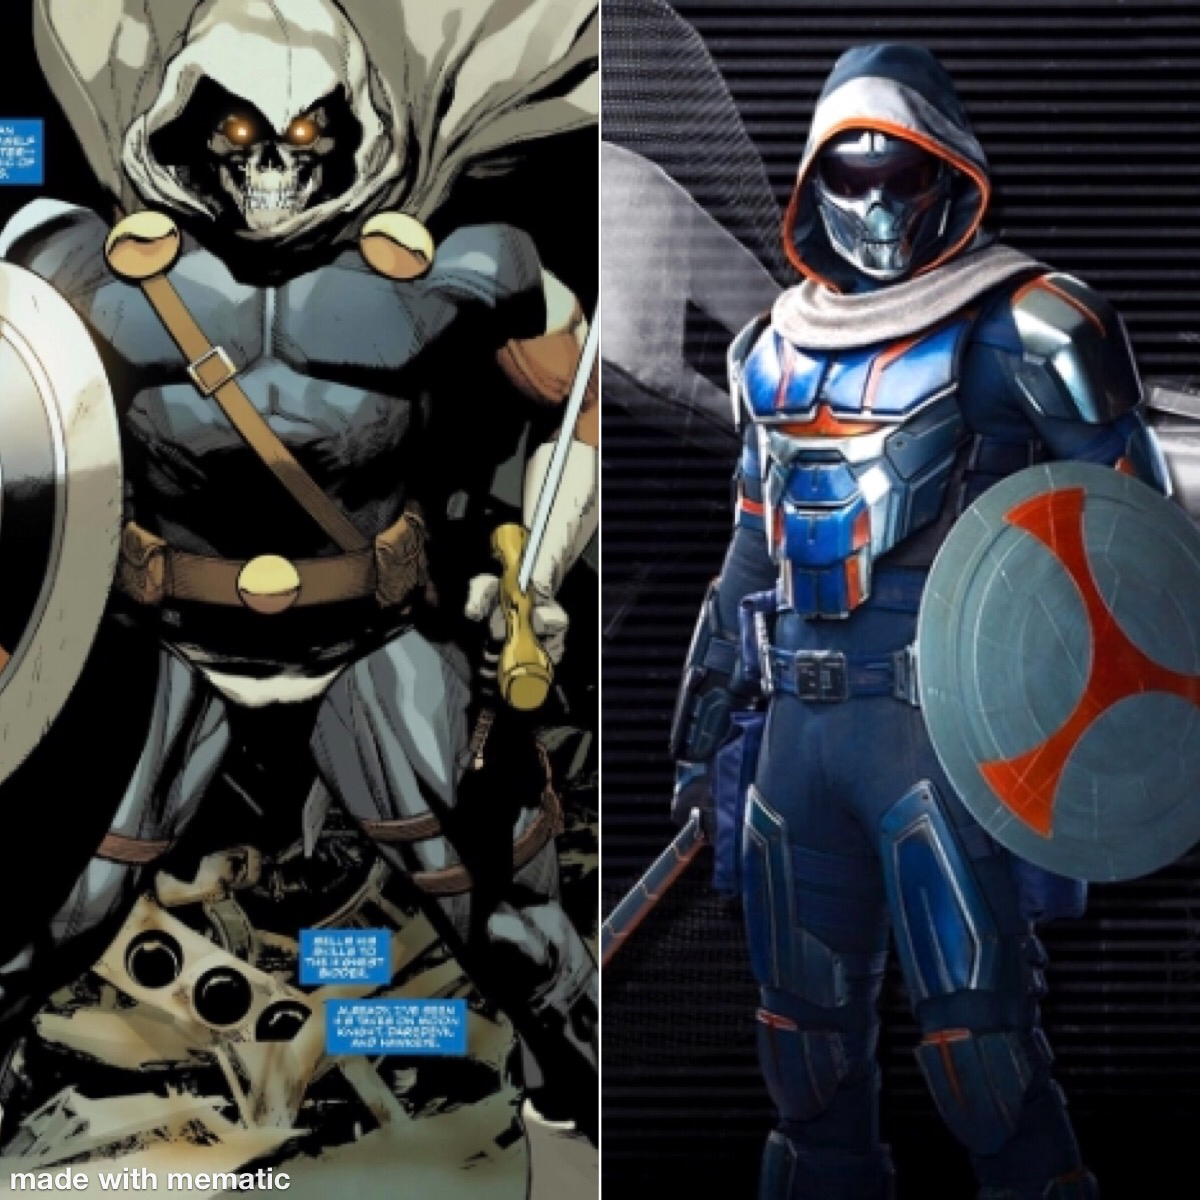 What Do You Think About Taskmaster S Redesign In The Black Widow Movie Fandom